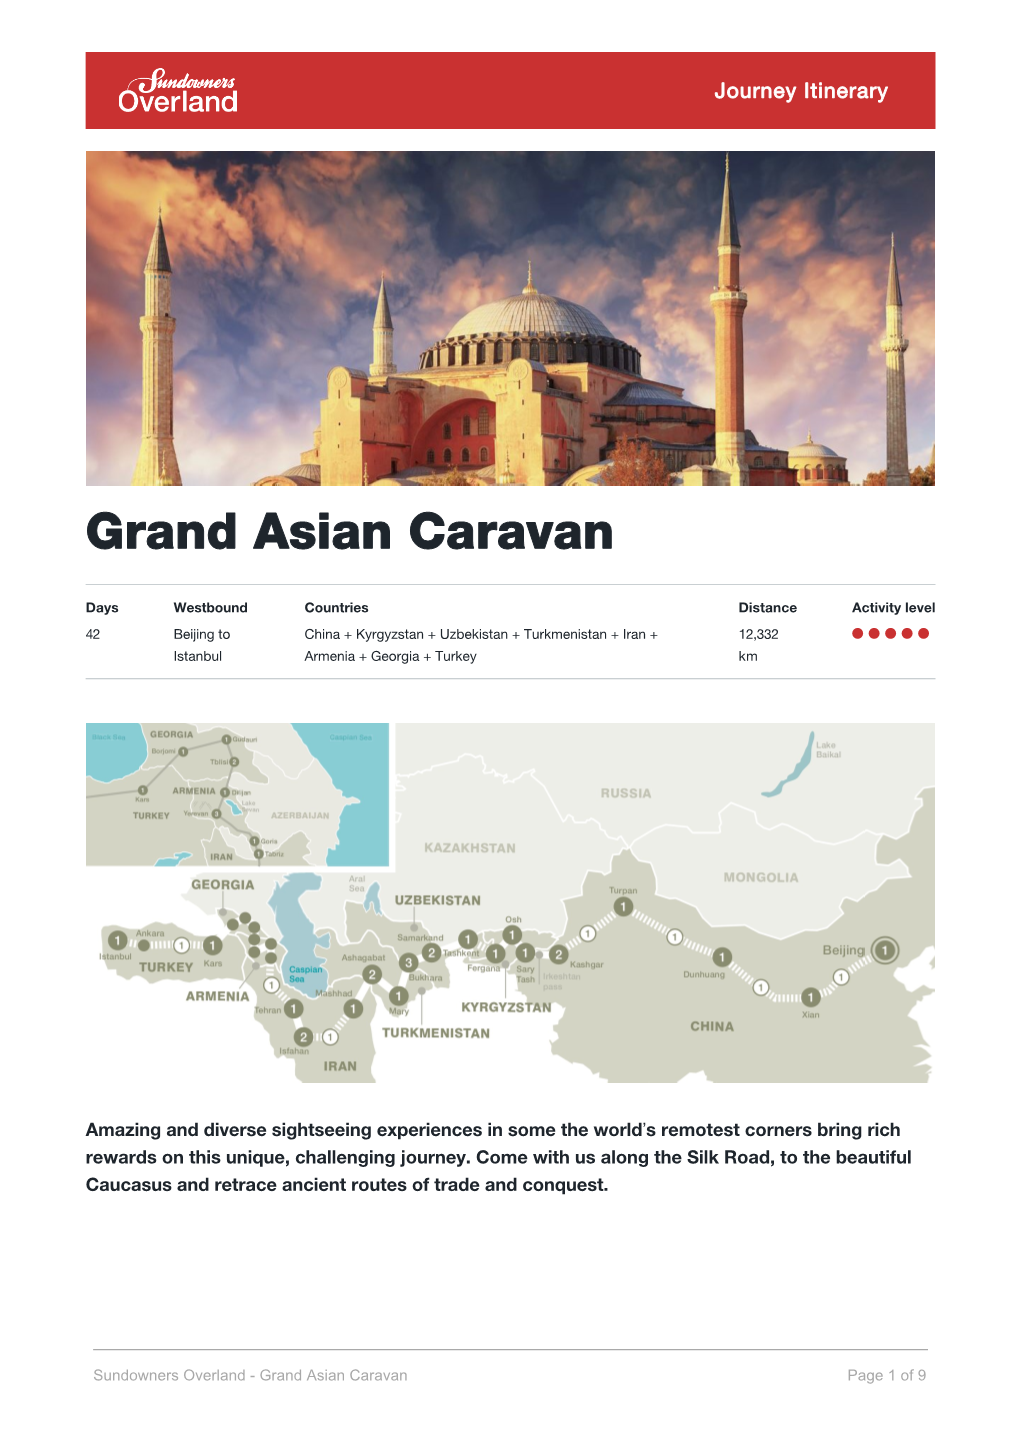 Sundowners Overland - Grand Asian Caravan Page 1 of 9 Itinerary